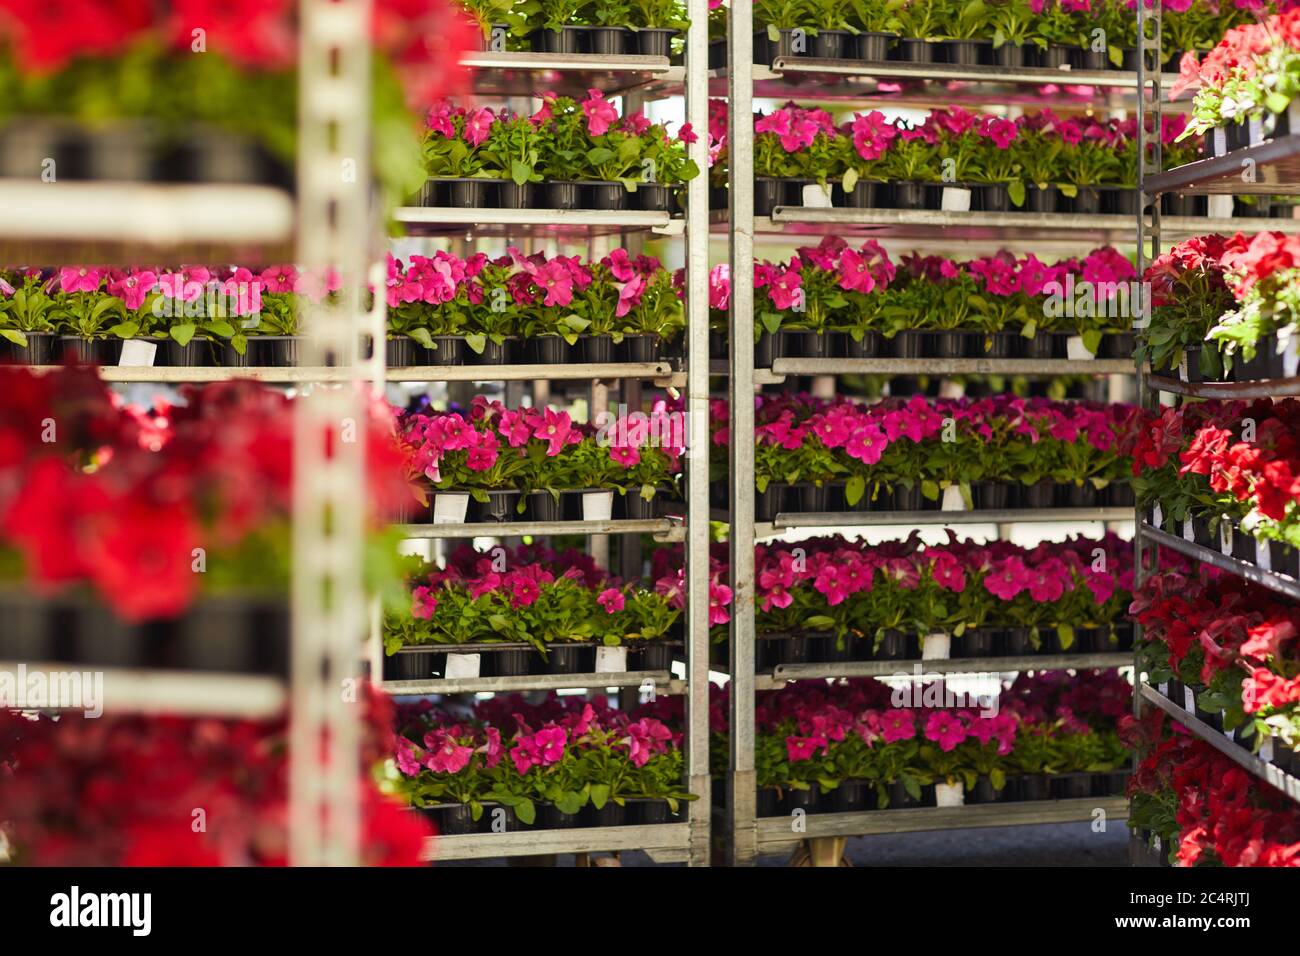 Background image of many pink potted flowers stacked on shelves in plantation, copy space Stock Photo